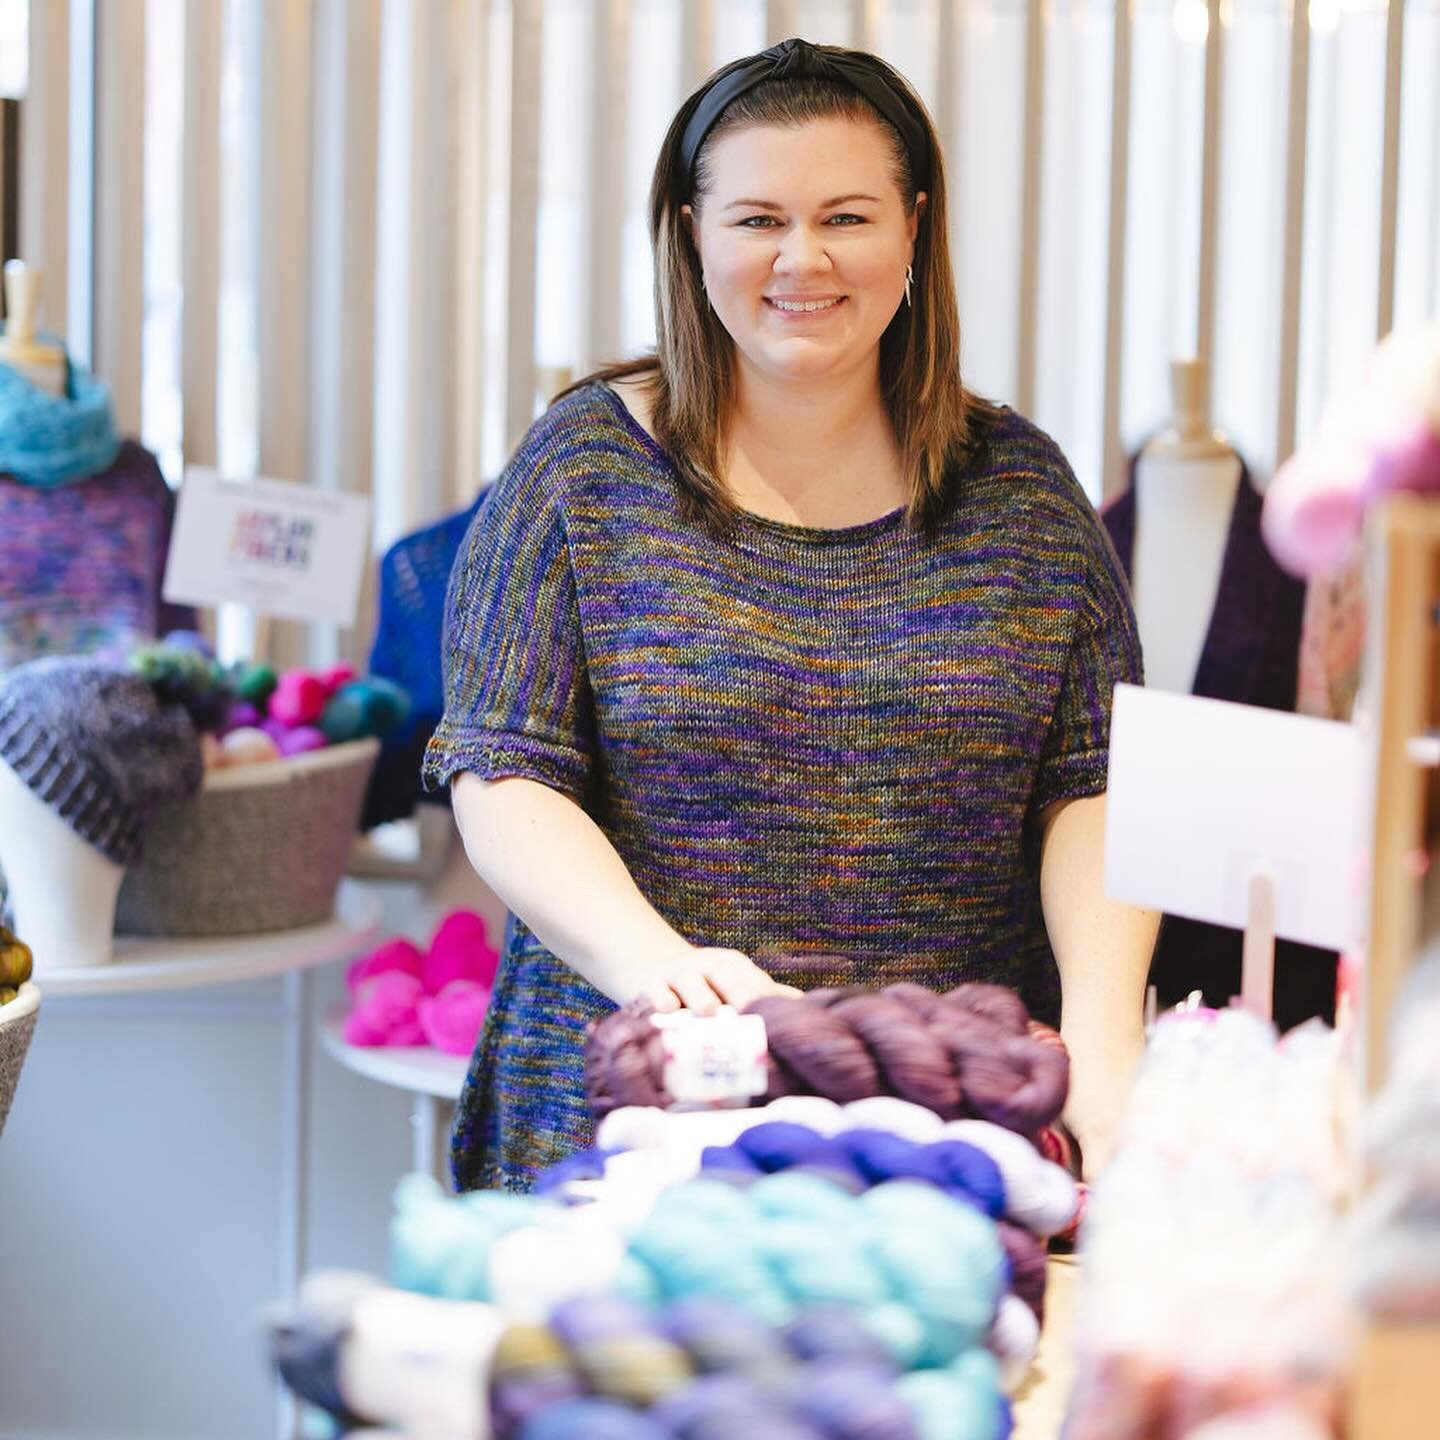 Happy Birthday to one of our fave indie dyers and most excellent humans&hellip; Stephanie of @asylumfibers 

Stephanie has been part of the Stitch Up community for years and has sponsored more than five of our events. She is incredibly talented human